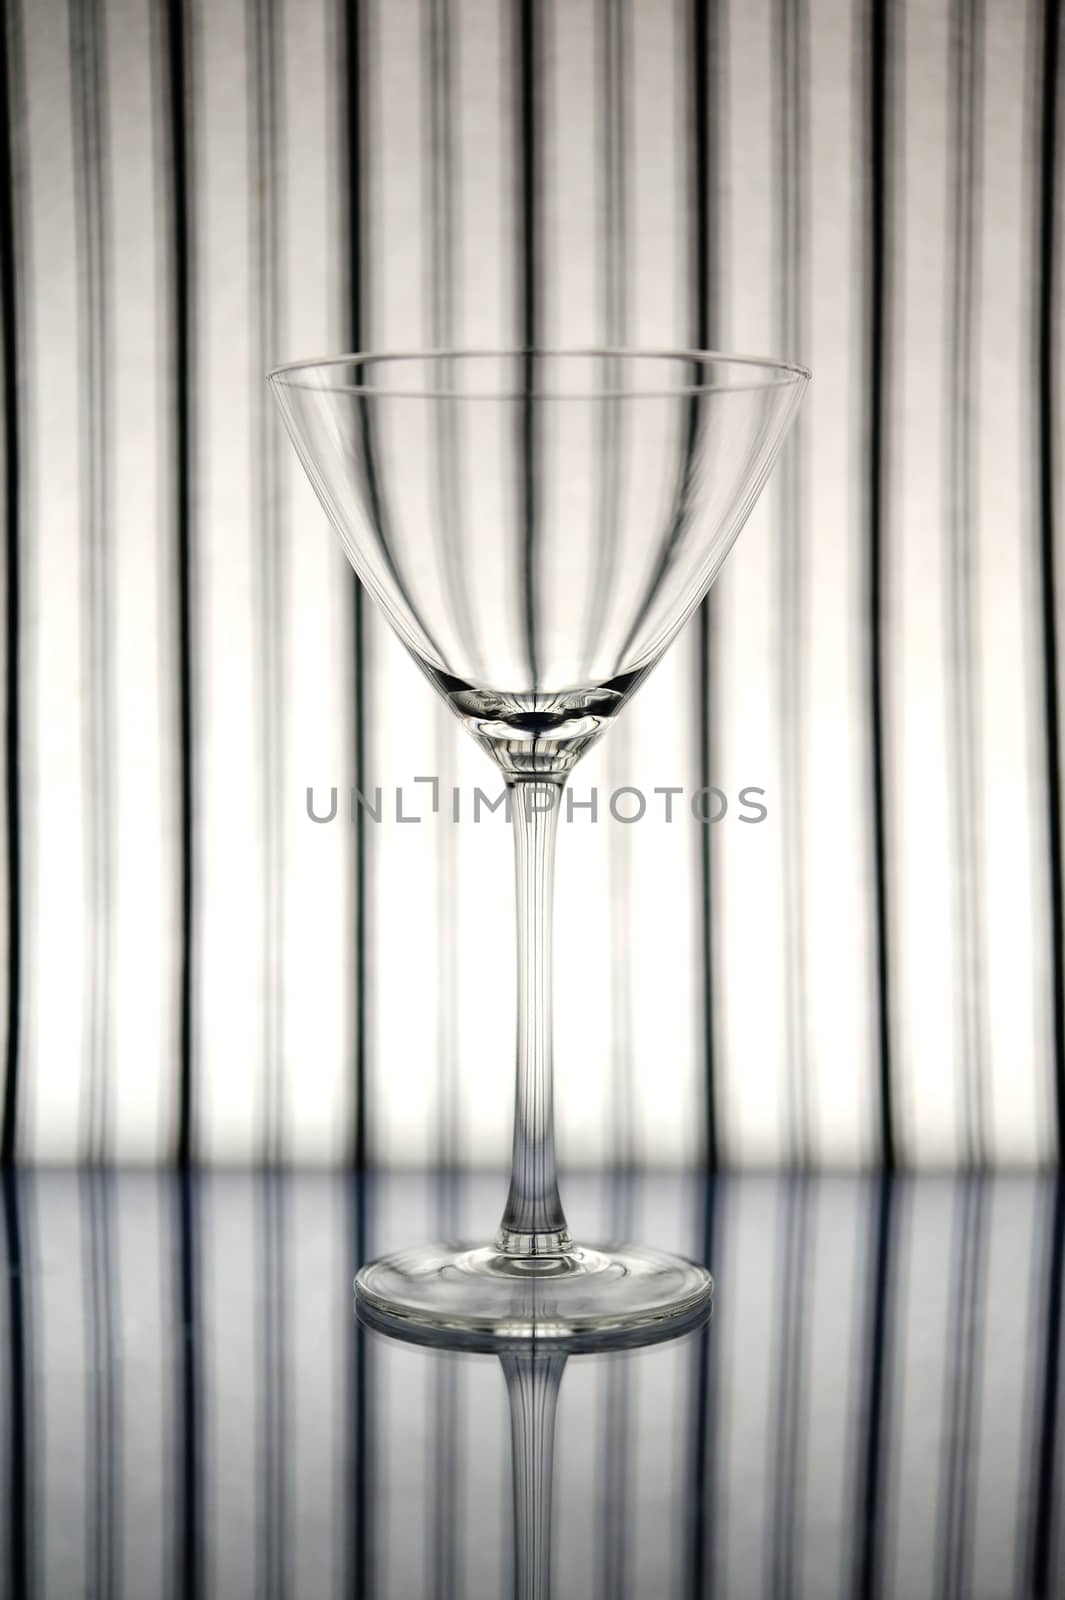 Cocktail glass in front of striped background